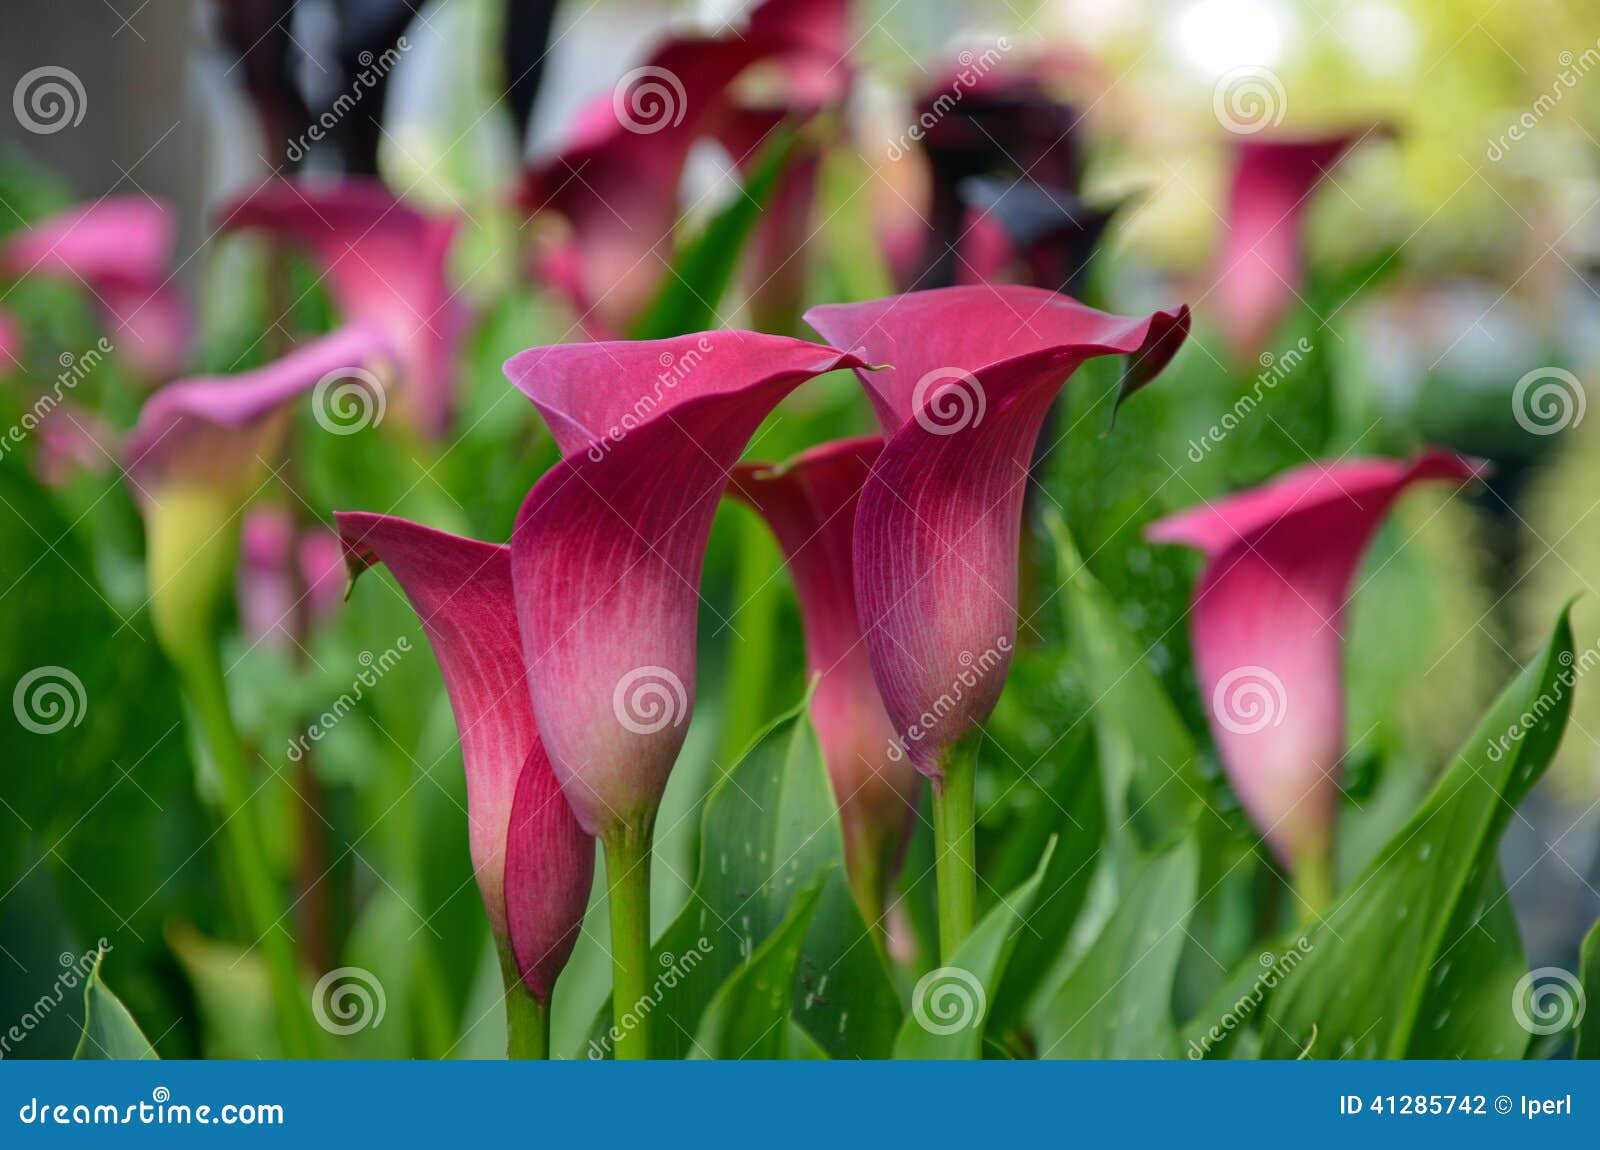 Pink calla lily flowers stock photo. Image of petals - 41285742